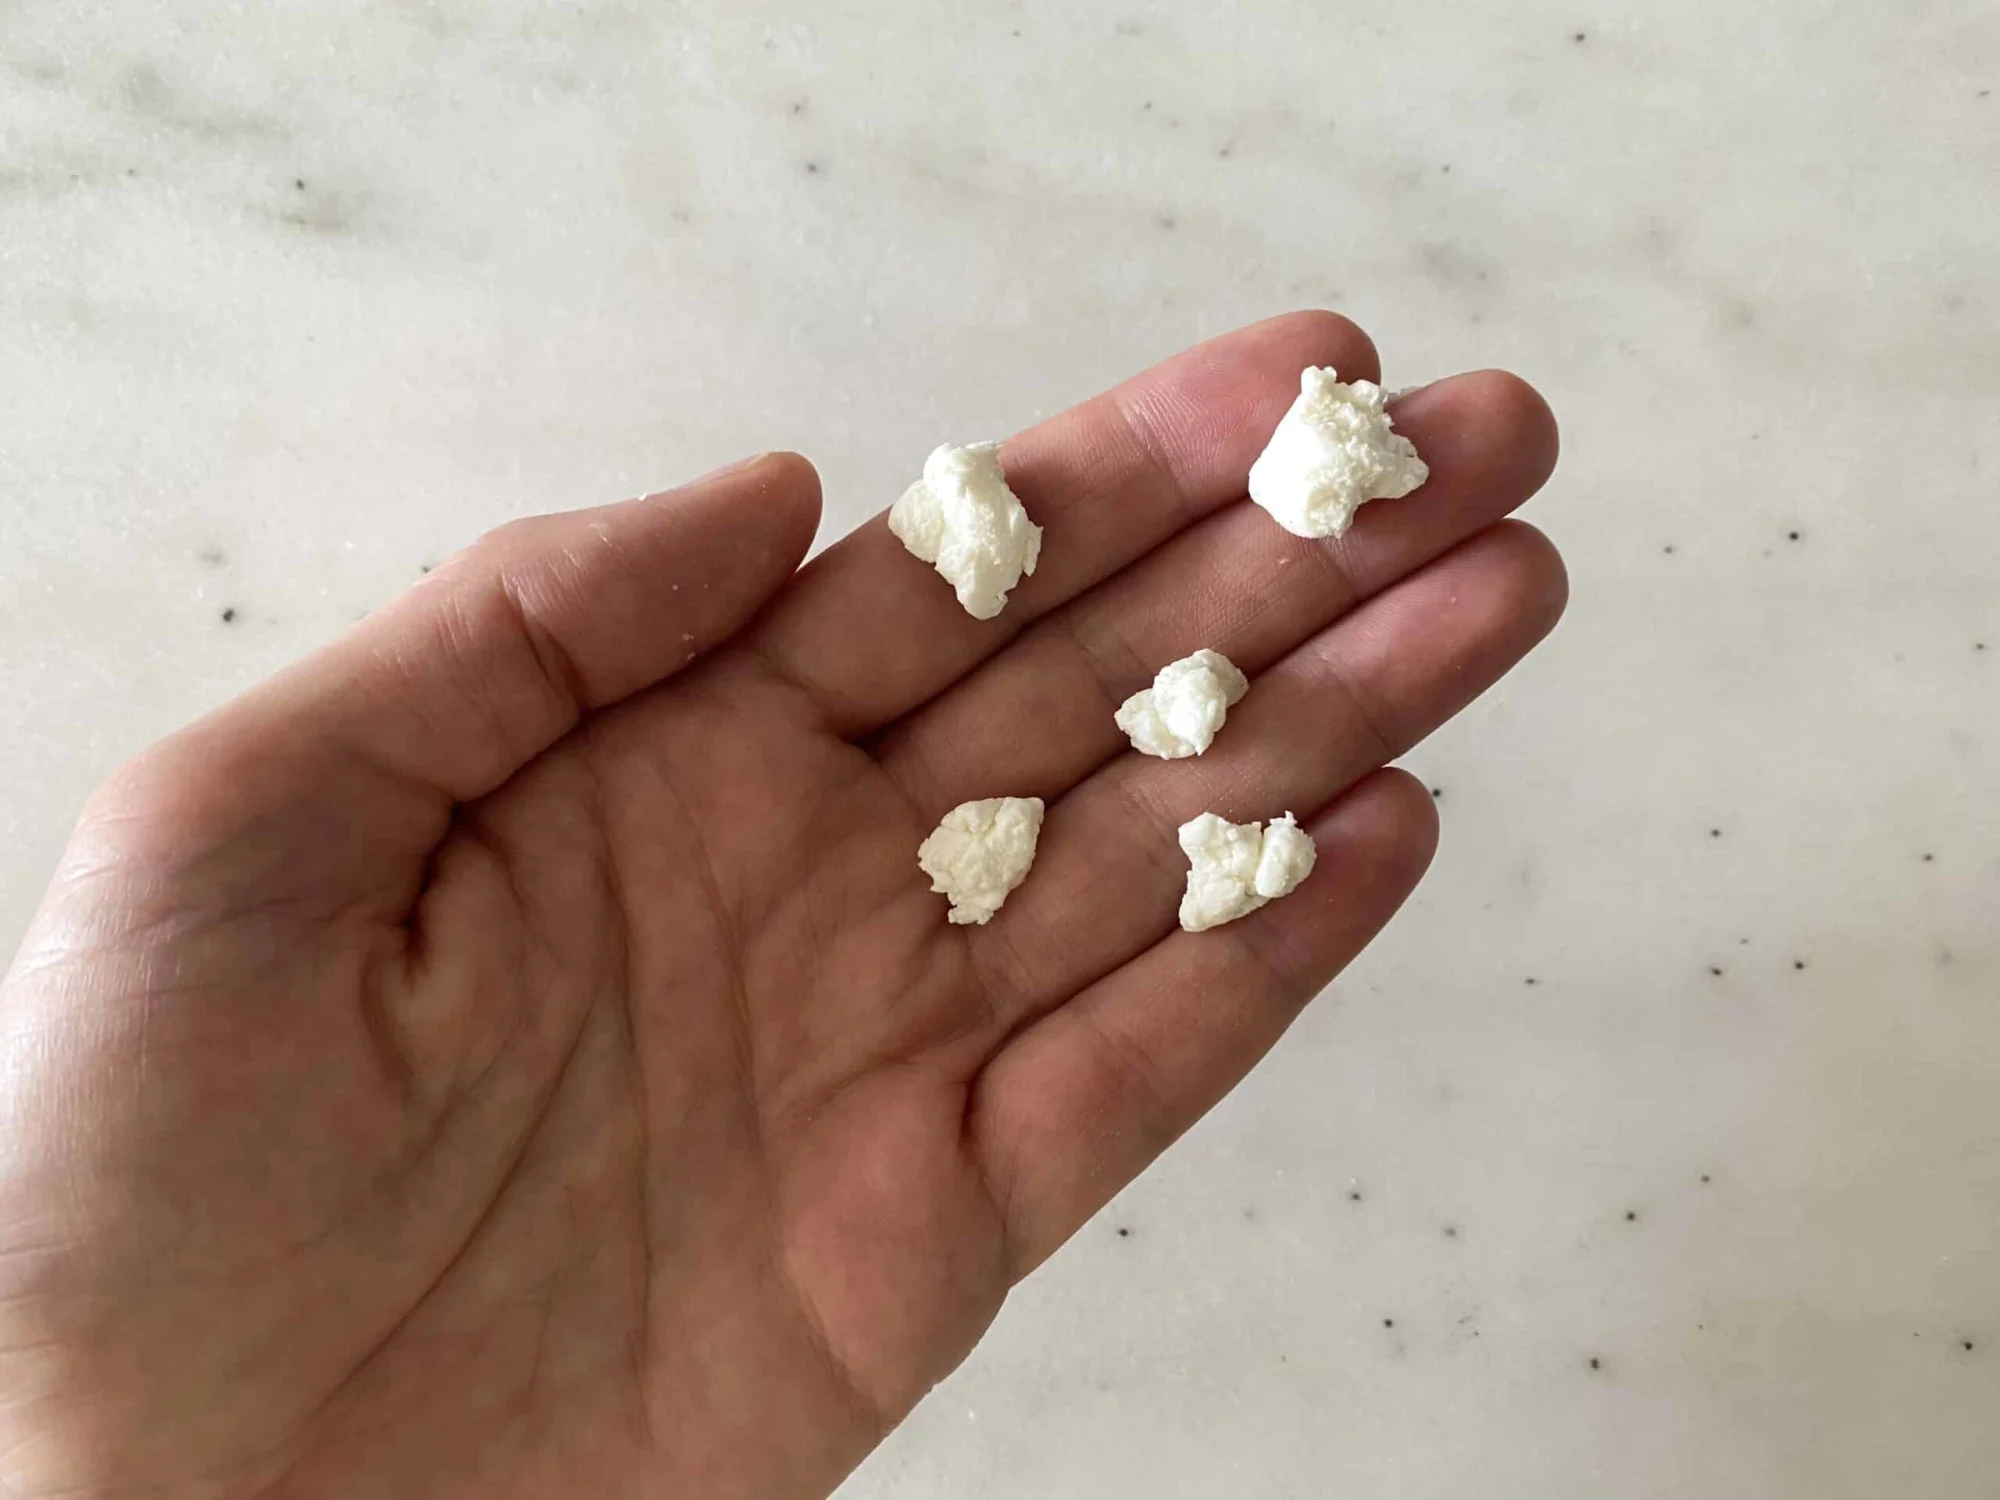 hand holding five pearl size goat cheese crumbles